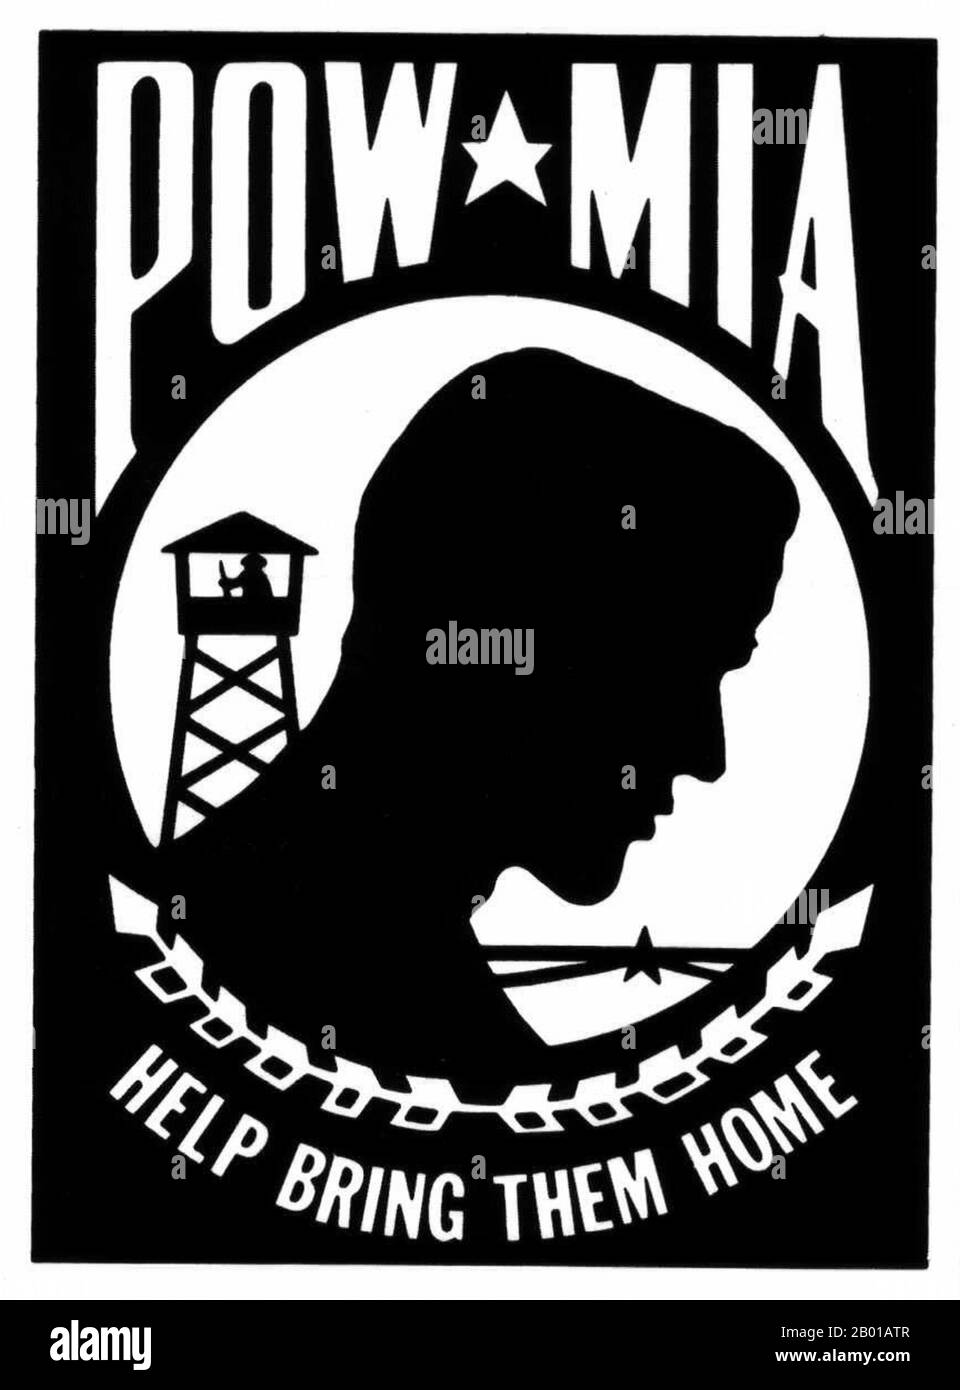 Vietnam/USA: A poster demanding the return of Prisoners of War (POW) and combatants Missing in Action (MIA) supposedly held in Vietnam after the American defeat in 1975.  The Vietnam War POW/MIA issue concerned the fate of United States servicemen who were reported as missing in action (MIA) during the Vietnam War and associated theatres of operation in Southeast Asia.  Following the Paris Peace Accords of 1973, 591 American prisoners of war (POWs) were returned during Operation Homecoming. The U.S. listed about 1,350 Americans as prisoners of war or missing in action. Stock Photo